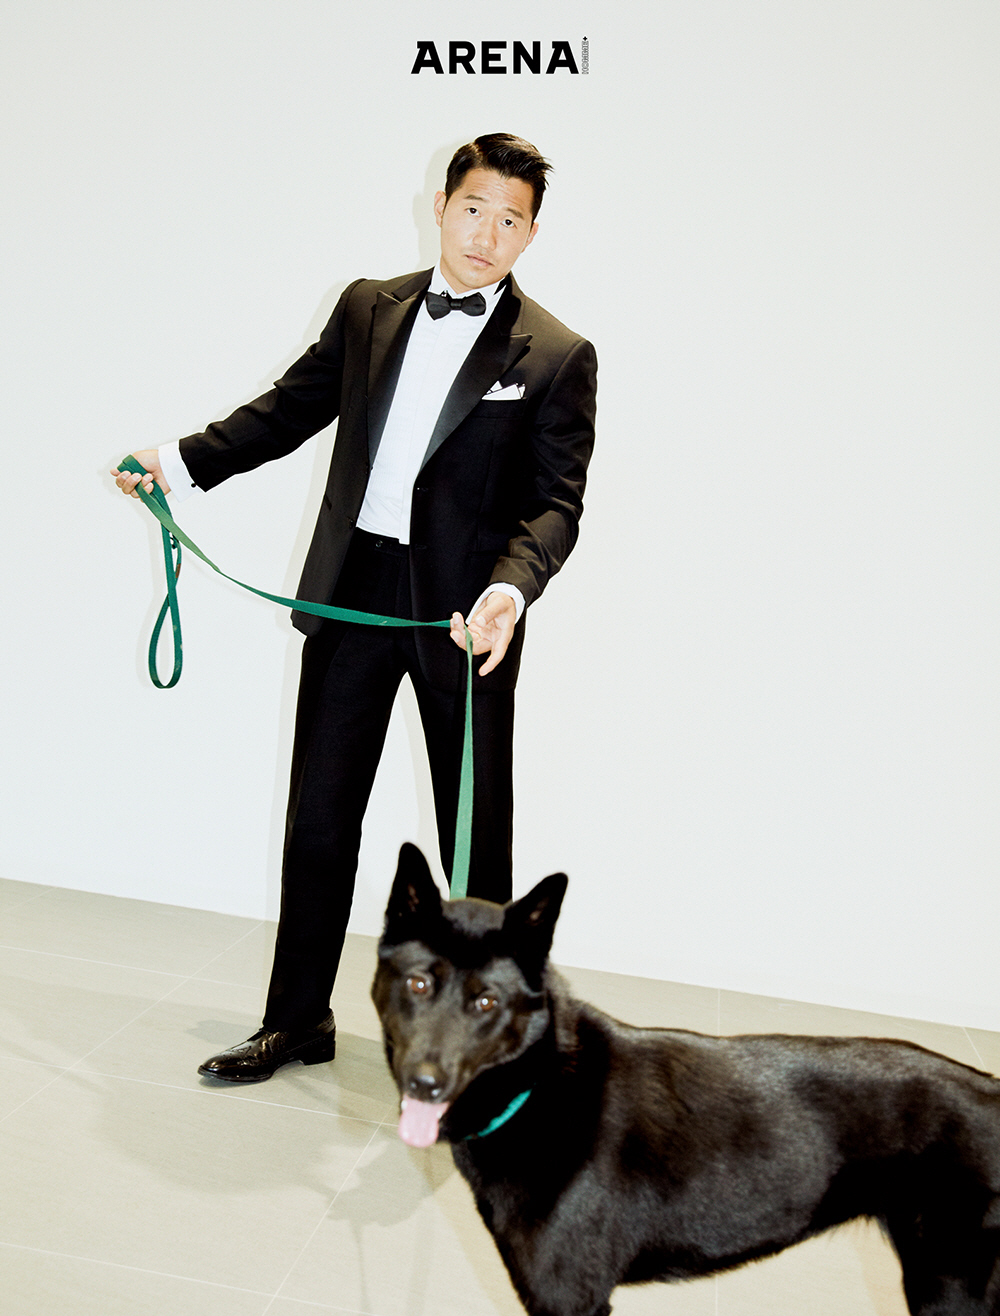 Pet trainer Kang Hyung-wook s first fashion picture and full-scale interview were released.Kang Hyung-wook , dressed in a suit for an interview picture with the mens Arena Homme Plus, stood in front of the camera with Pet Baro.He got a little awkward, and soon posed naturally as he joined Pet Baro.In the following interview, Kang Hyung-wook  said, The photo shoot is really so embarrassing. I always wear a T-shirt, but when will I shoot this?Kang Hyung-wook  was a change of perception of Pet in Korean society.Kang Hyung-wook  appeared while people were catching up with dogs that did not listen, and there is no bad dog in the world, and the culture of respecting Pet became the mainstream.Kang Hyung-wook  said of the education at the time, It was extremely human-centered. I only pressed Pets without worrying about why they bark.Would you not bark while raising Border Collie at the office? Impossible. Its like keeping a chicken from pecking. You have to rethink the problem behavior.Is it a problem for Pet to run or just that I am uncomfortable? I have to worry about whether the Guardian himself can not provide the environment and opportunity.At first, I couldnt get it. My cell phone was broken and I went to the service center, and it was like an employee saying, Your cell phone doesnt want to change the liquid crystal. Just six years ago.But I wanted to explain it to you as best I could, and there were people who listened to the story little by little. Kang Hyung-wook  recently dealt with very aggressive pets in Dog is good and showed a strong discipline that was different from the previous one. Perhaps many people who see Dog is good will wonder.Why do you press Pet these days? I keep asking myself as a trainer and checking out what I said.There is someone who doesnt play the Guardian role, states the Guardian: Its etiquette that I teach the 31-month-old son the most.It takes three things to raise a child.To understand your mind, to provide time and place and play to express your energy, and to teach you how to get along with others.Many Guardians choose to cook only a few things, and Guardian is a parent, and he wants to be an uncle or aunt.I think theres a side Ive made Guardians that way, and I feel responsible: most of the dogs I meet now are dogs that have been abused by affection.He also said, Many Guardians tell me, Our dog is socially degraded. In fact, Guardian is socially inactive.If Pet barked at someone, it is first to apologize for the short line and to apologize, but there are many people who just bark.We should tell the dog about the system that lives in this society and show the Guardians appearance. Why do he love dogs so much? Sometimes people who have lived and have to live hard, protect themselves, want to go somewhere and stay alone.Only companion animals can show such a thing.My wife, for example, always says Im going to throw out my red pants for ten years, but our Dahl or Baro dont say that. Ha ha ha.Of course I know she loves me and says that, but the dog neither scores nor judges us.The Kang Hyung-wook  trainers office of the center was accompanied by the slogan Making a dog-raising society.Ive been through many Europes, and theres someone on the street who doesnt care for anyone if theres a dog that doesnt care for anyone.If a dog is tied up in a remote place, there is definitely an old man left there, children waiting in a locked door.The rate of people with disabilities is similar to that of the world, but in Korea, there are no people with disabilities.I also think that this government is taking a lot of taxes because I do business, but I think in my mind, This is Europe. It is not a political story.I just want my child to live in a world where the socially disadvantaged can live well. The average of the treatment and environment that the weak receive is the indicator of the Europe.The goal is to create a society that grows dogs well, and thats where we start.He went on to ask why he refused to join the free Korean party ahead of the 21st National Assembly election in the troubles of Kang Hyung-wook  trainers for social underprivilege and good society.He replied firmly: I will never do politics, I dont go to a drink, I dont like organizational culture, so Im not part of any dog-related association or organization.What kind of person is Kang Hyung-wook , a human being, not a trainer?People see me educating Pet and think Kang Hyung-wook  is not excellent in character, but I am just a trained Pet trainer.I am grateful and fortunate to be able to grow as a trainer and grow myself, because the human Kang Hyung-wook  is far less than the trainer Kang Hyung-wook .Kang Hyung-wook , who is out of training, is just a man living in Gapyeong. Kang Hyung-wook s entire picture, and a genuine interview on Pet culture and his life, can be found in the July issue of Arena Homme Plus and on the website.